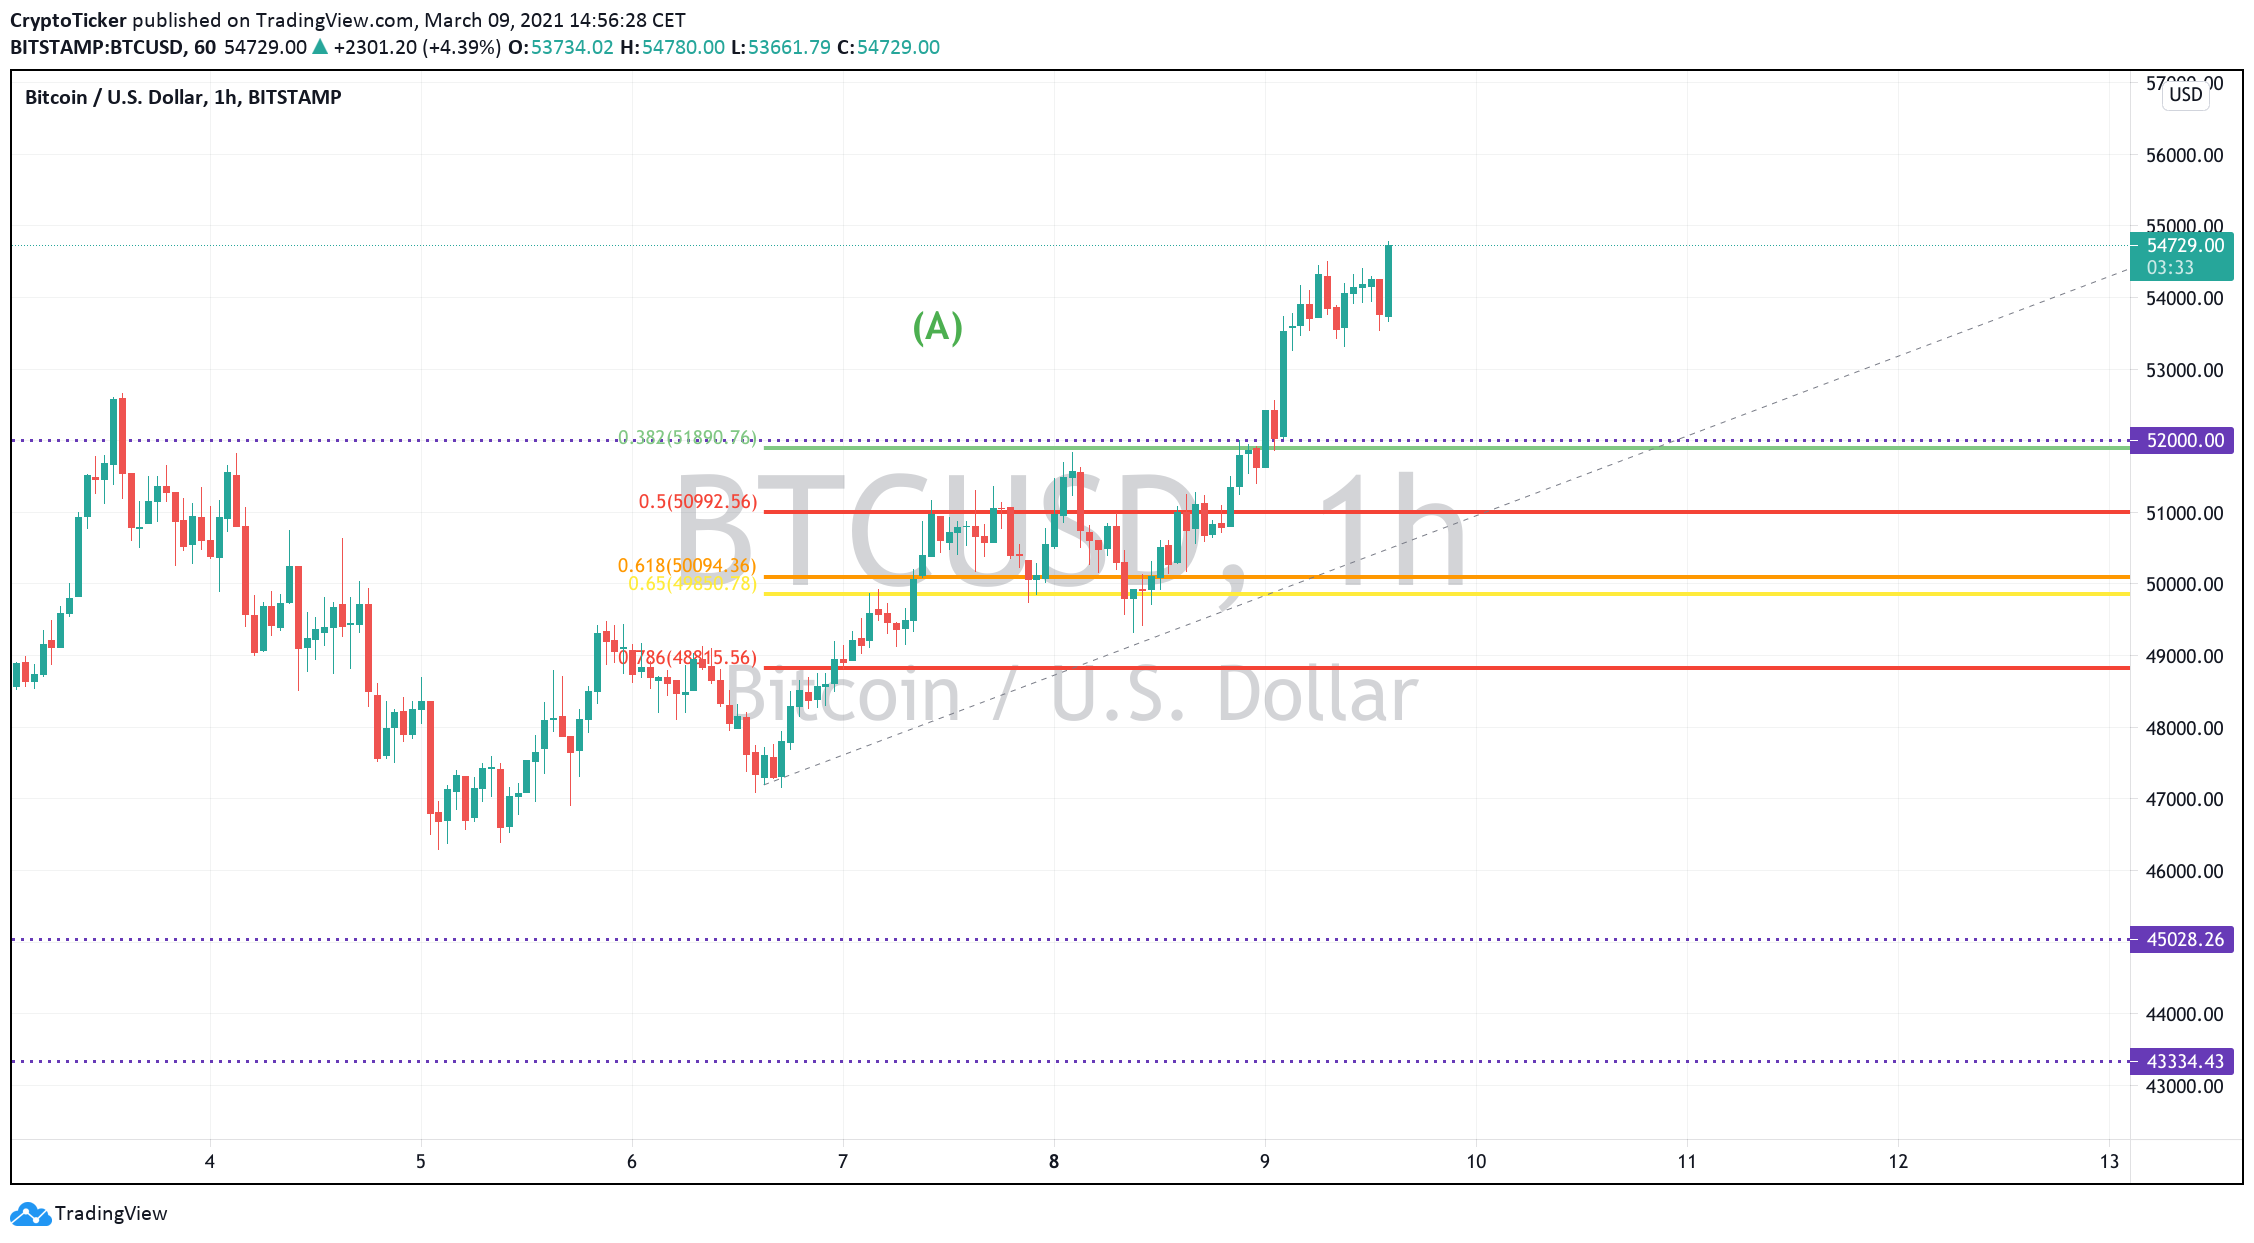 BTC/USD 1-hour chart showing Bitcoin's potential retracement